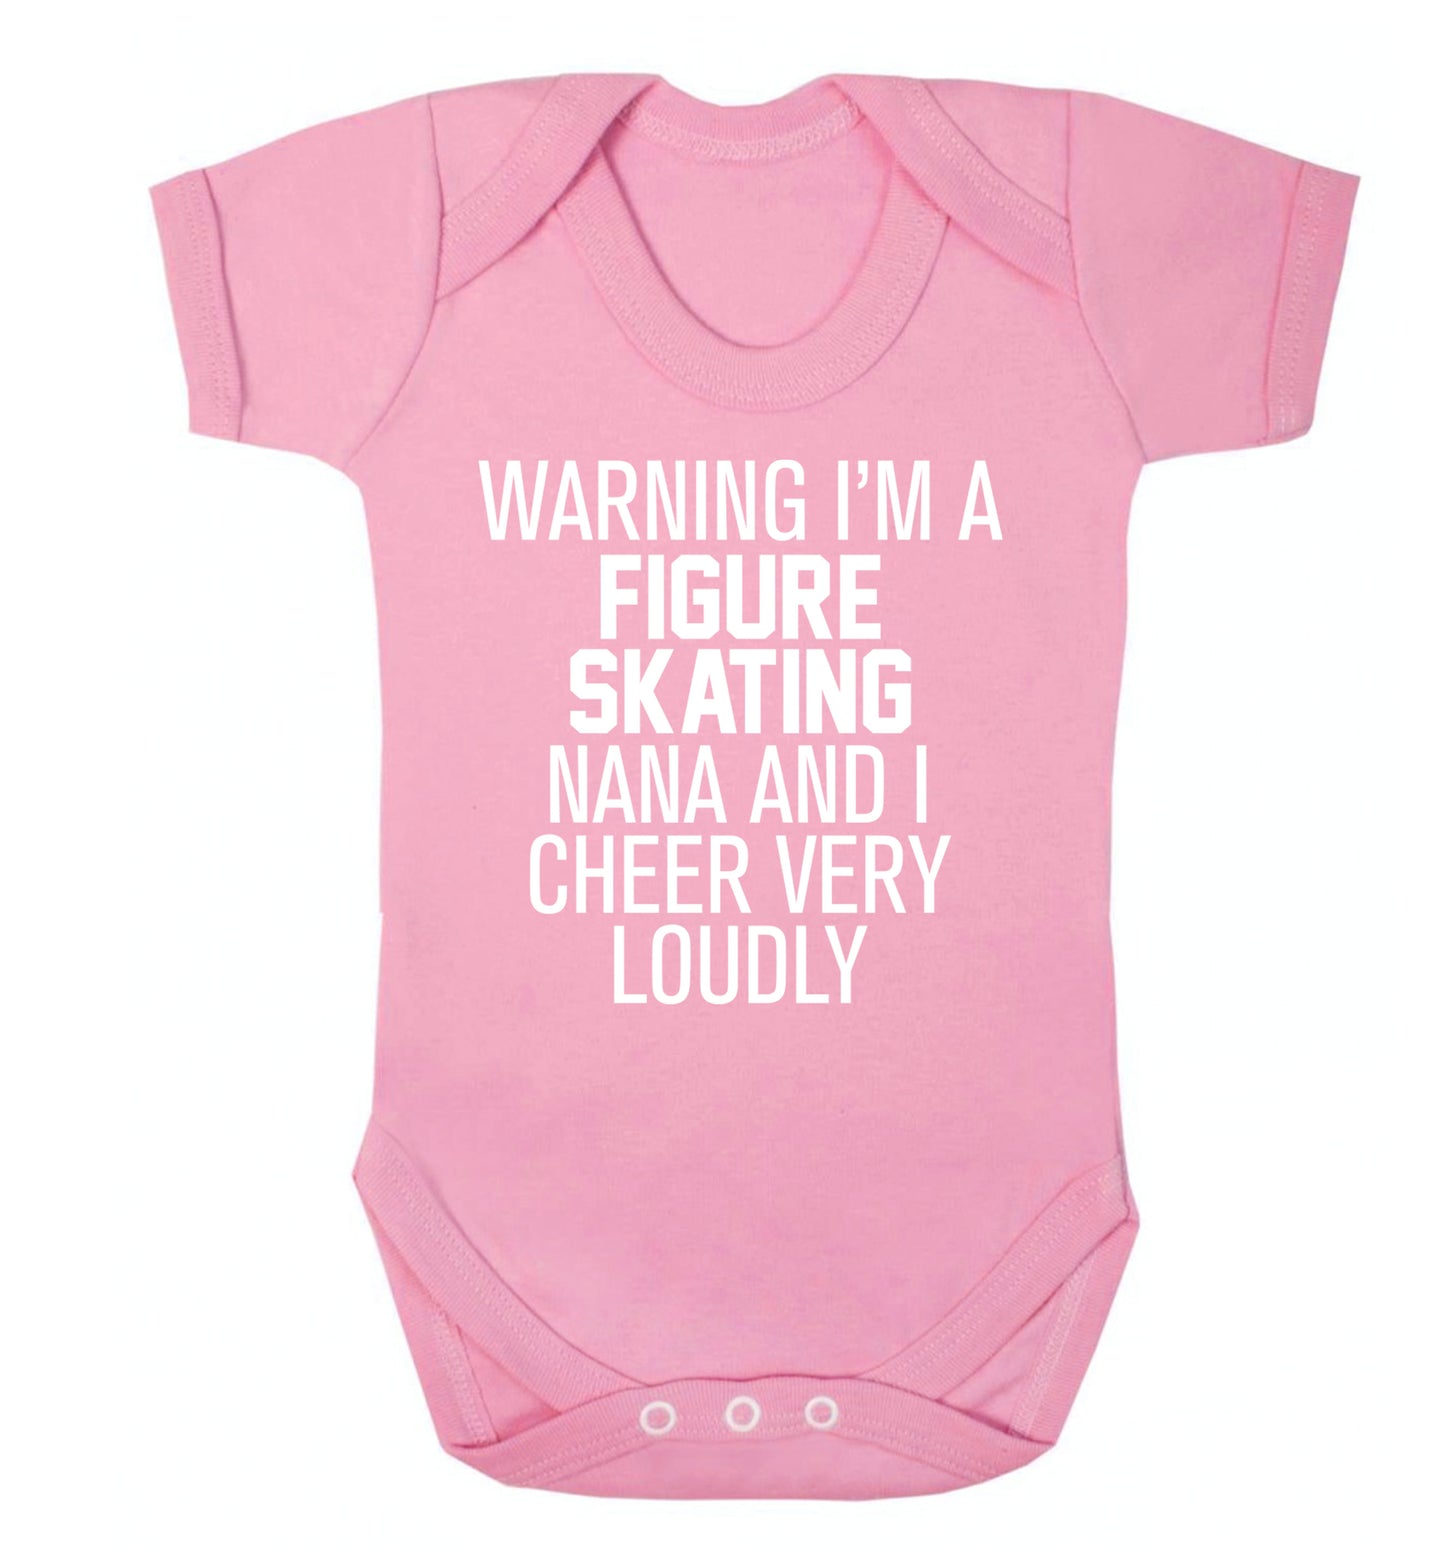 Warning I'm a figure skating nana and I cheer very loudly Baby Vest pale pink 18-24 months